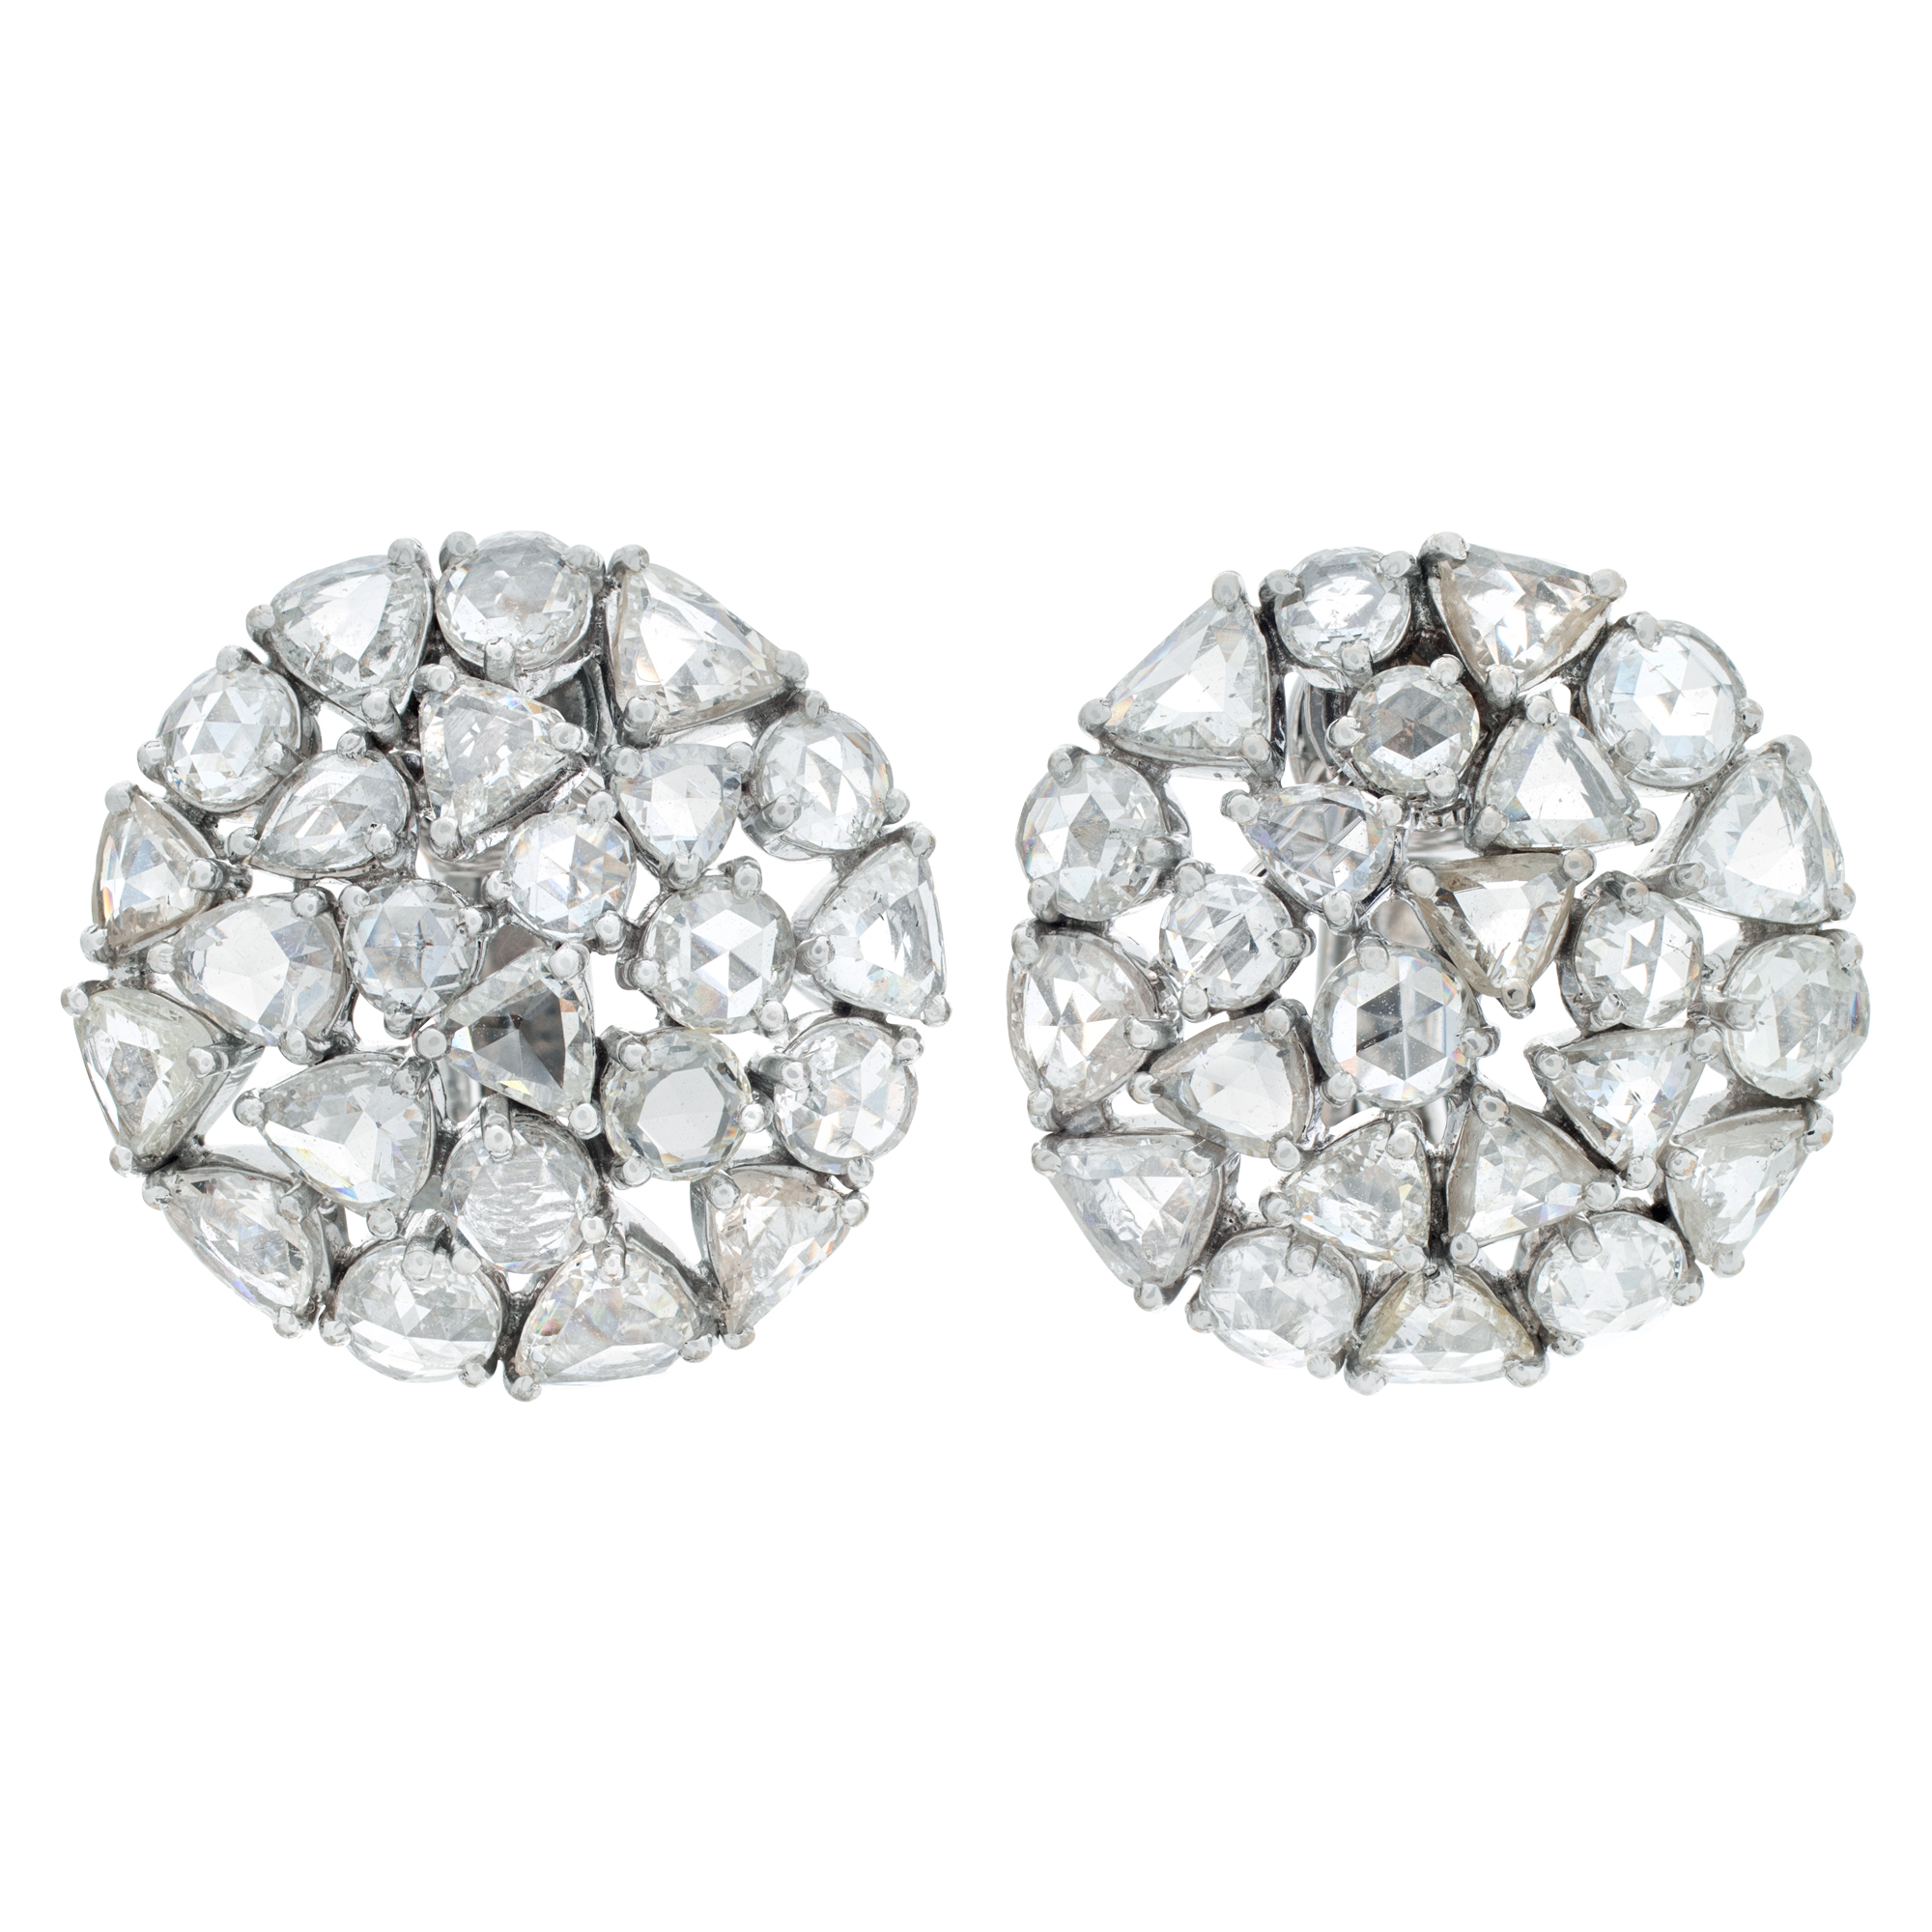 Round, triangular and pear shape, rose cut diamond earrings set in 18k white gold. Total approx. carat weight 6.82 carat image 1